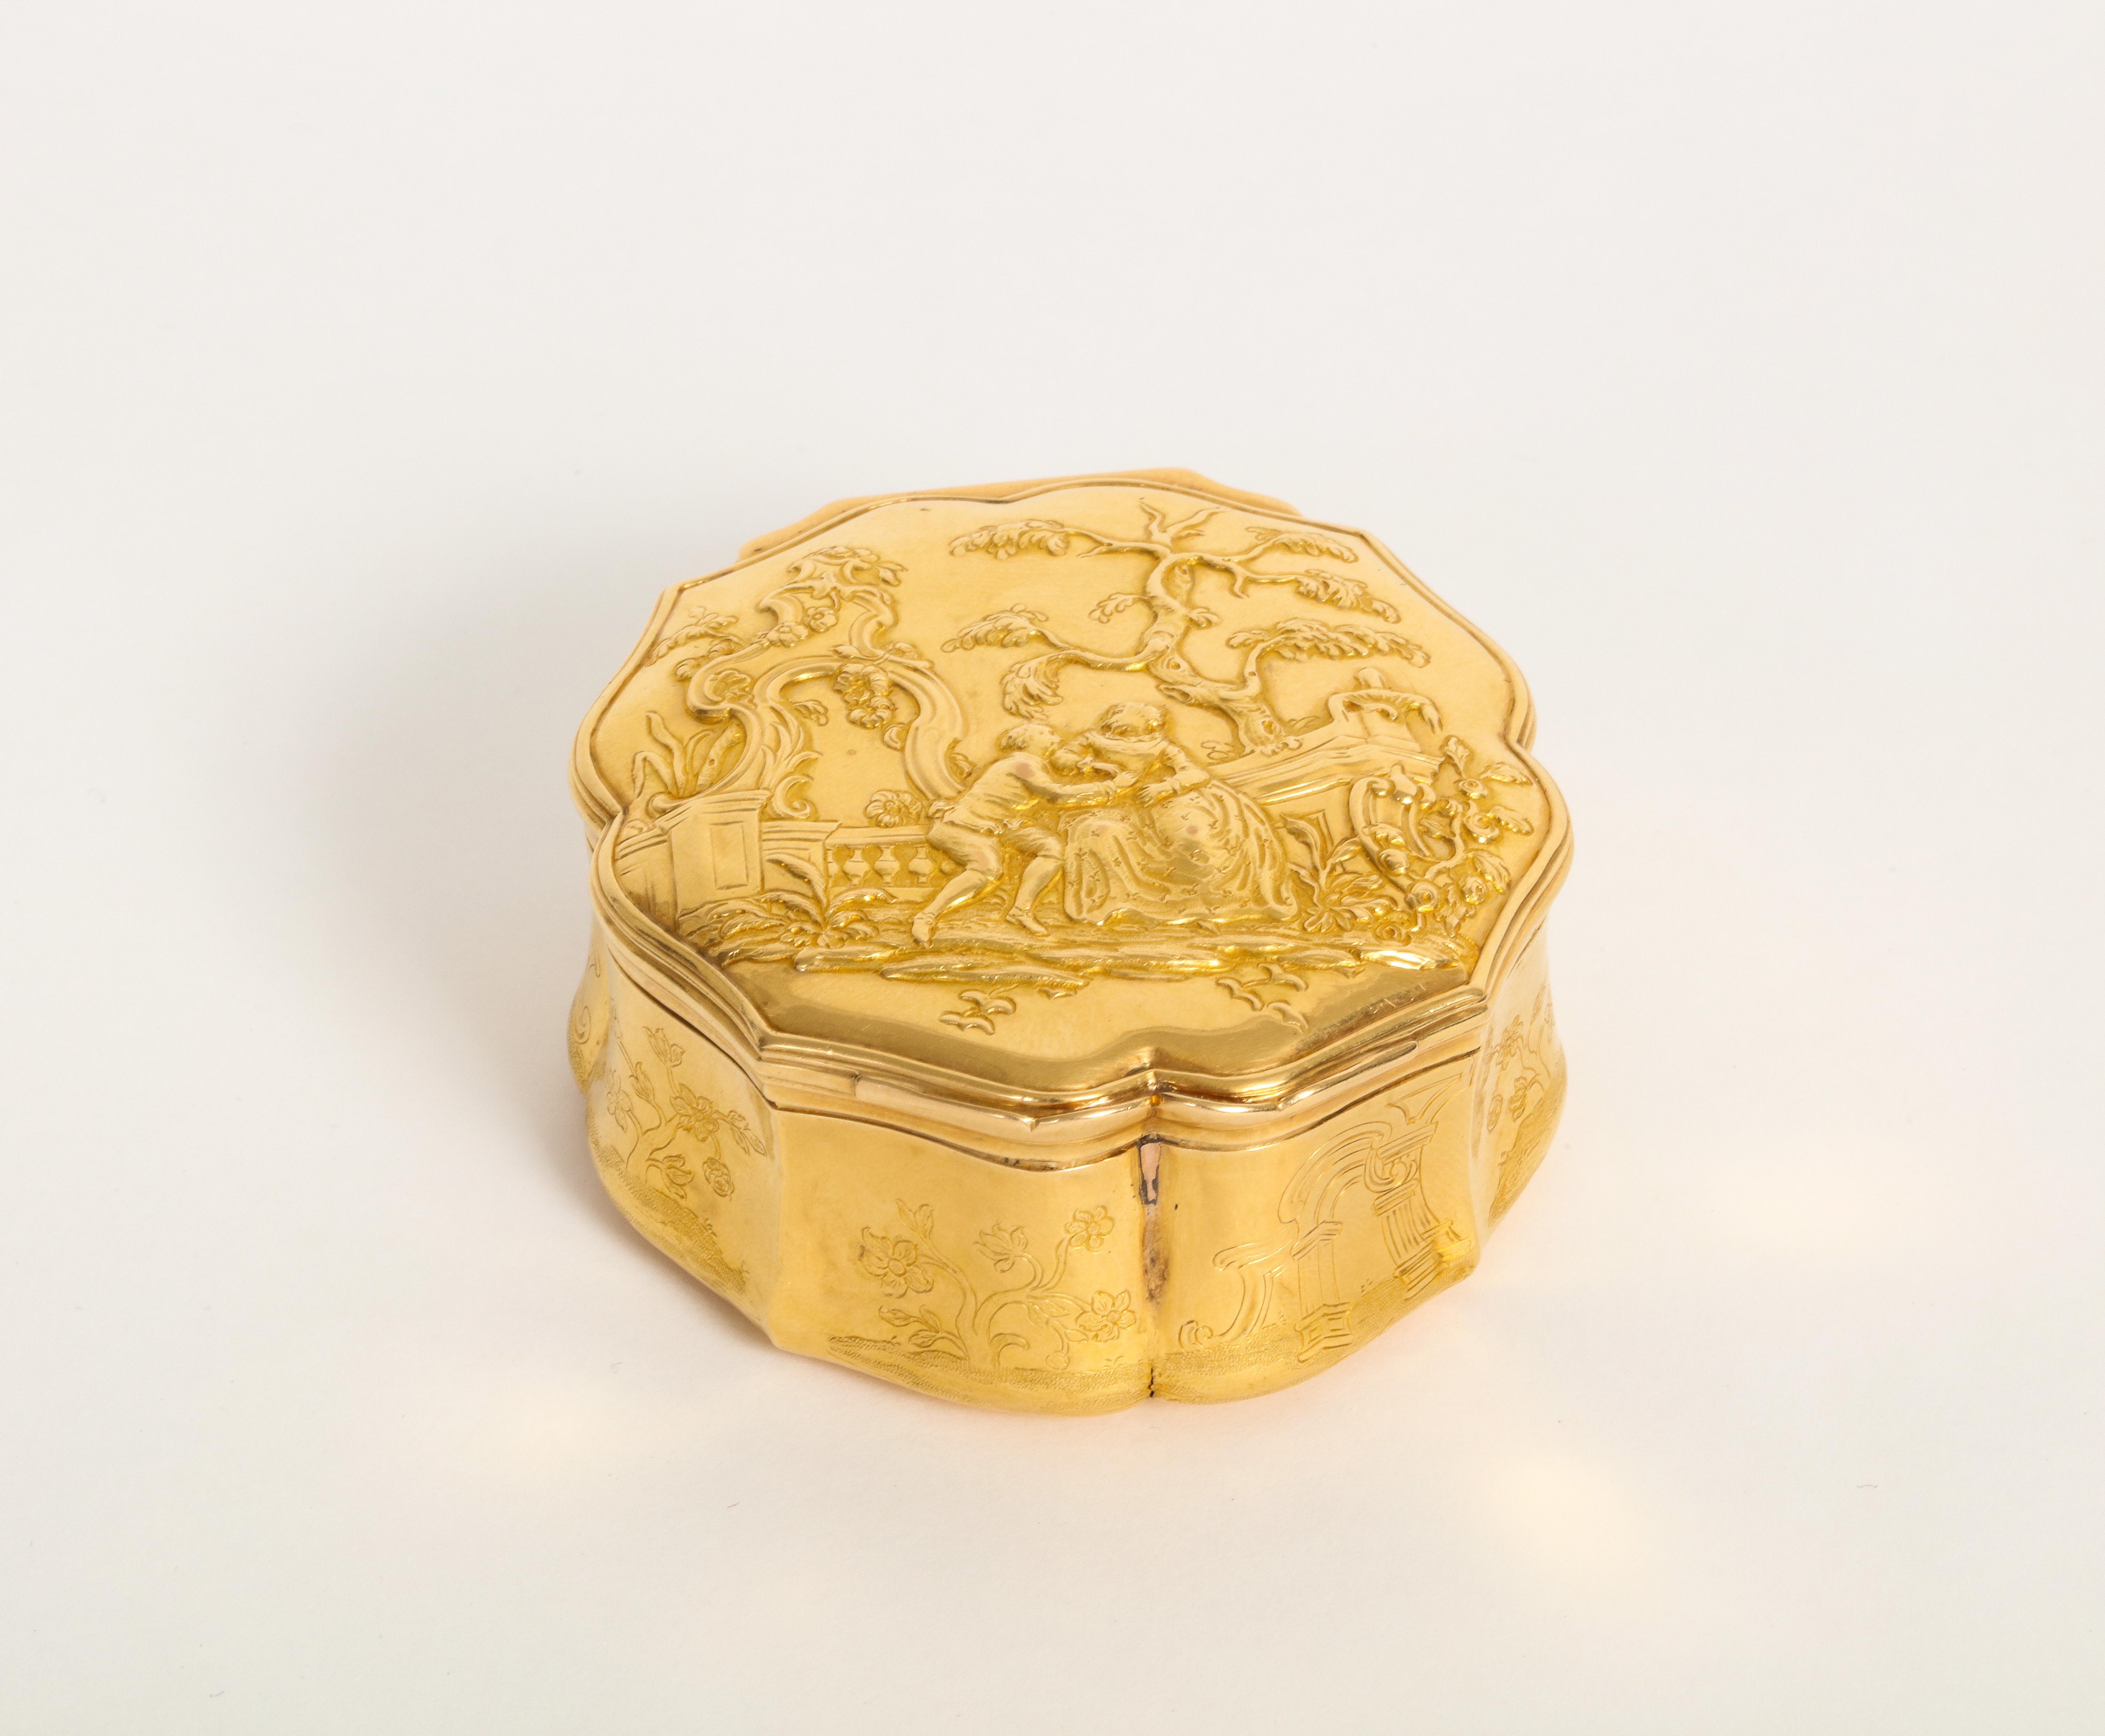 German Round Gold Snuff Box with Hidden Miniature For Sale